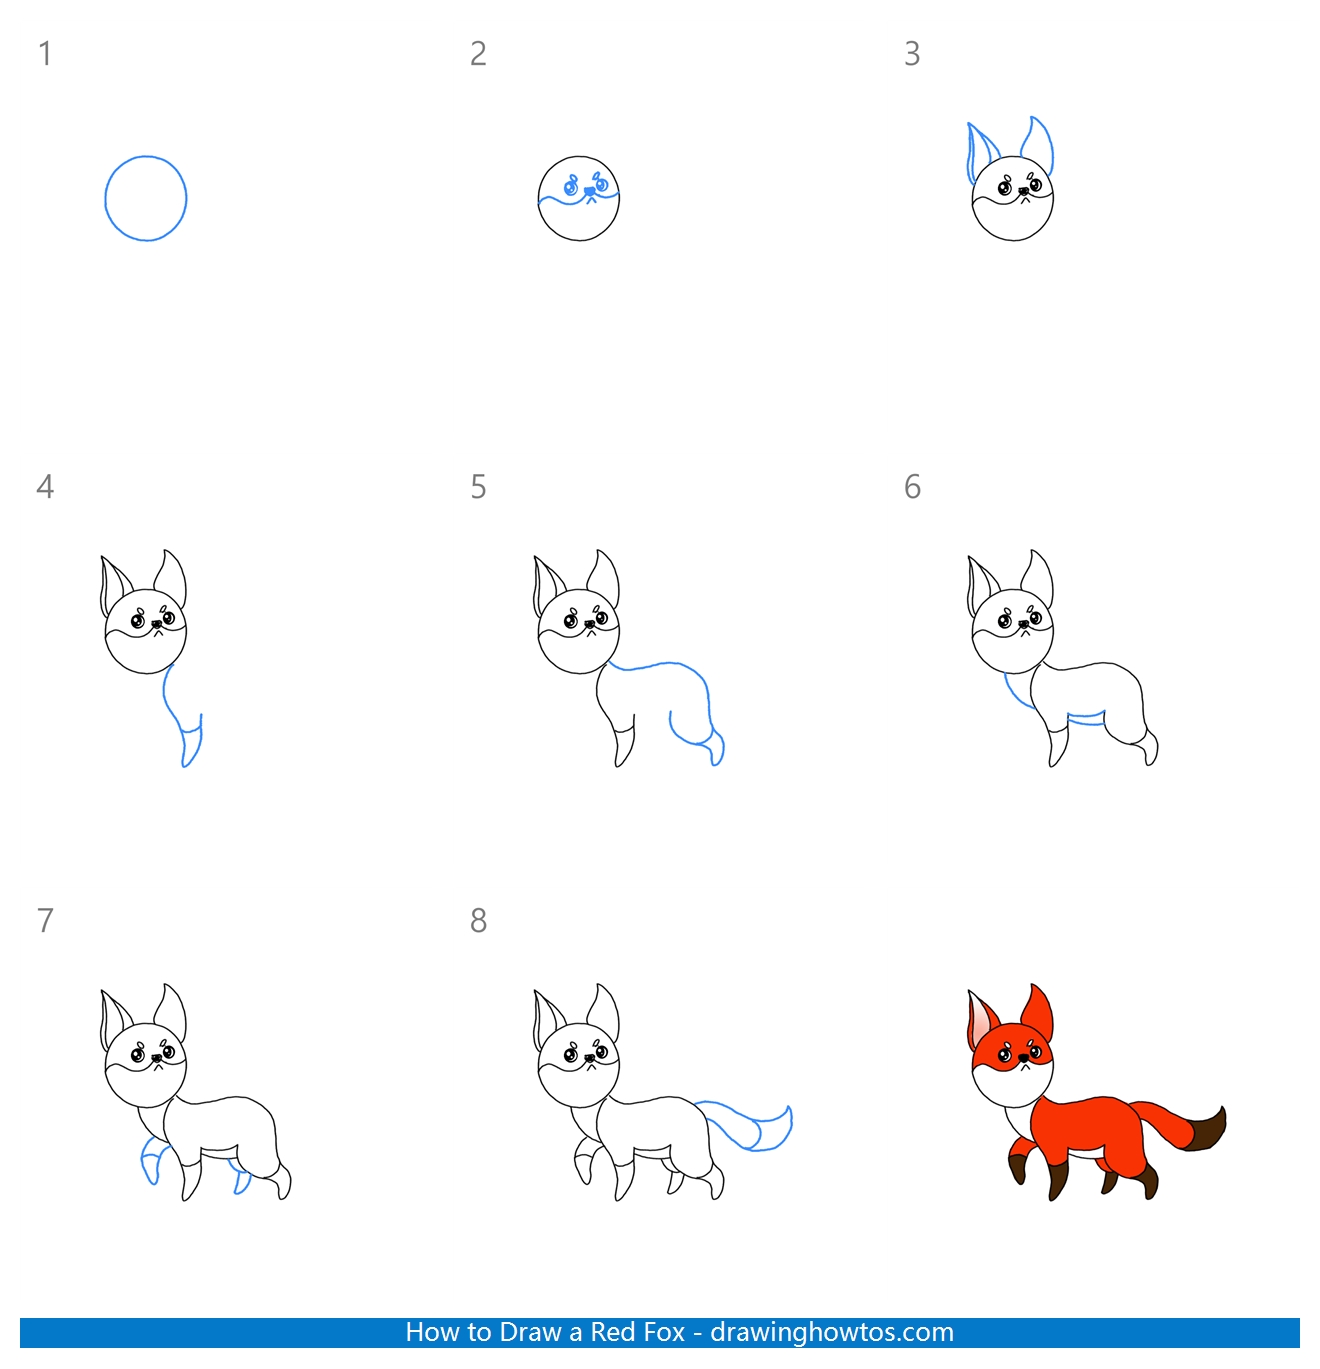 How to Draw a Red Fox Step by Step